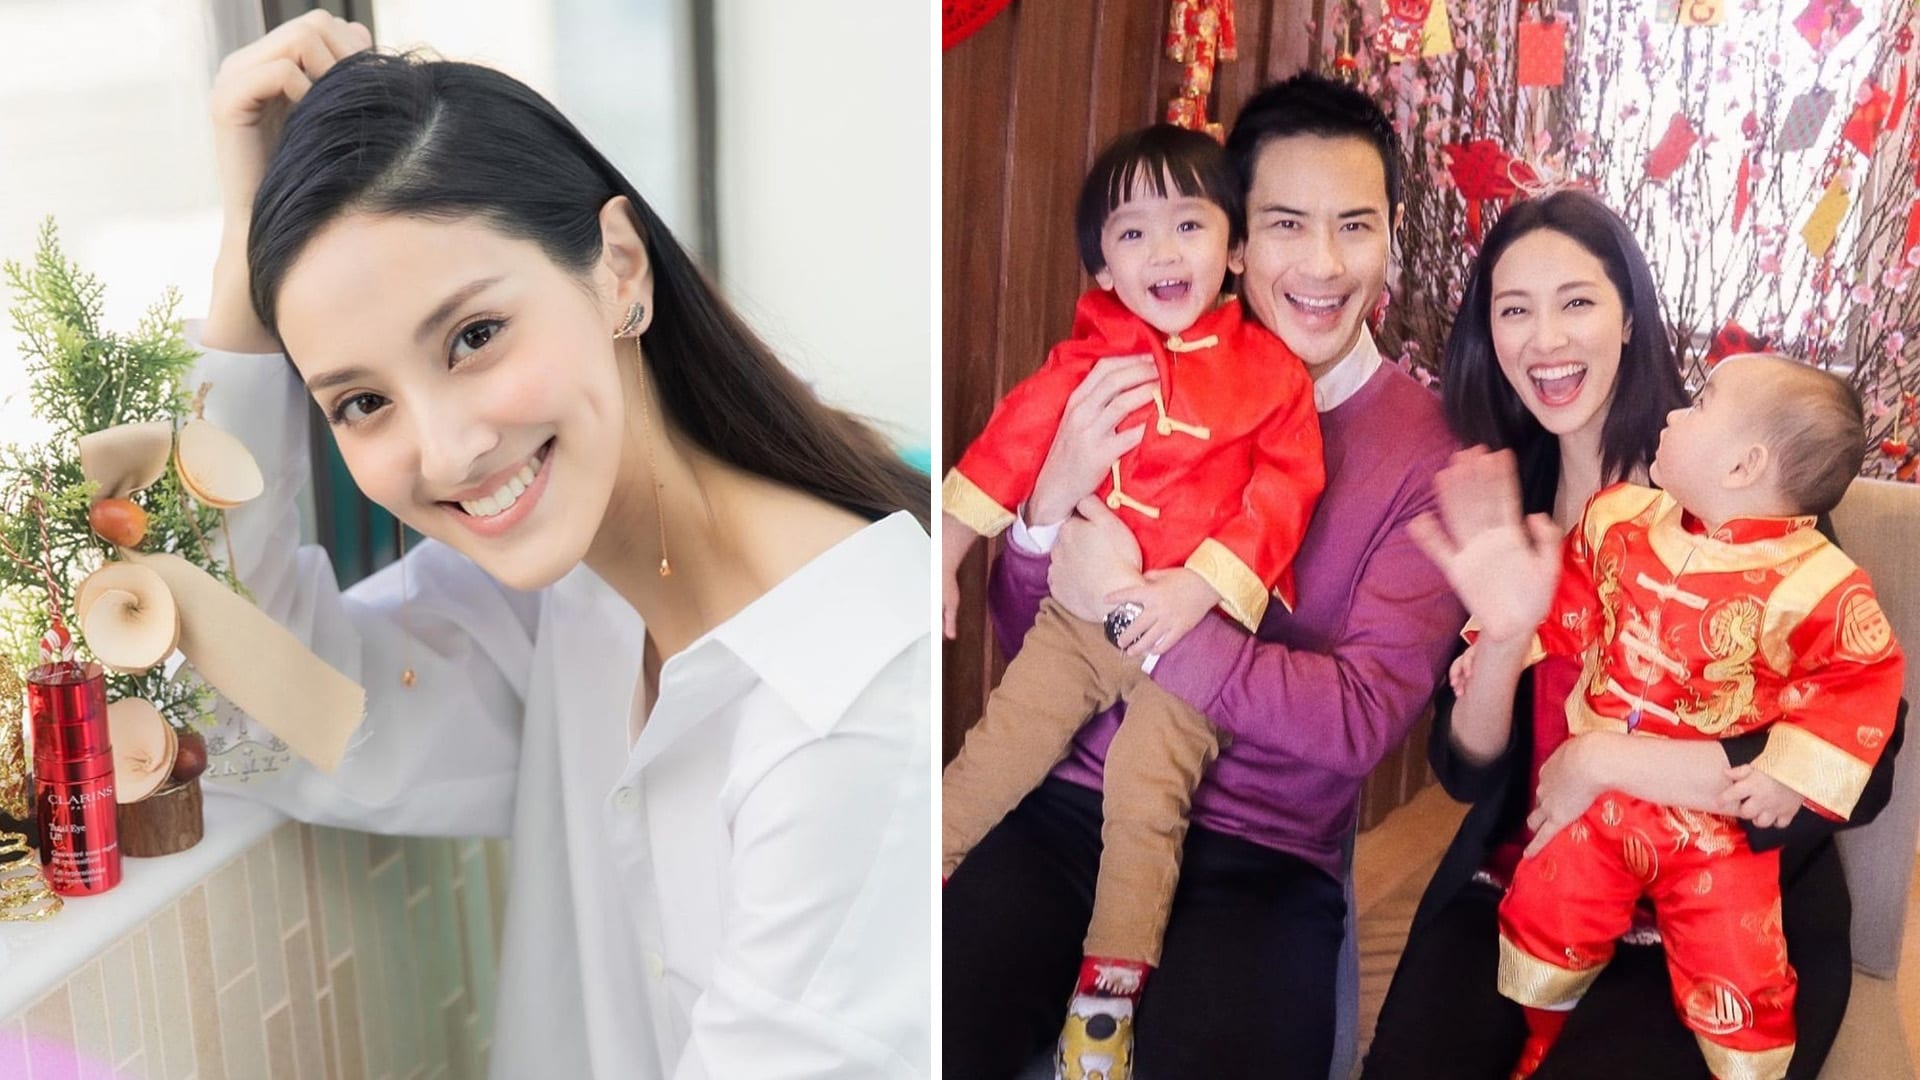 Grace Chan Doesn’t Want To Try For A Daughter 'Cos She’s Afraid Of Getting Twin Boys Instead